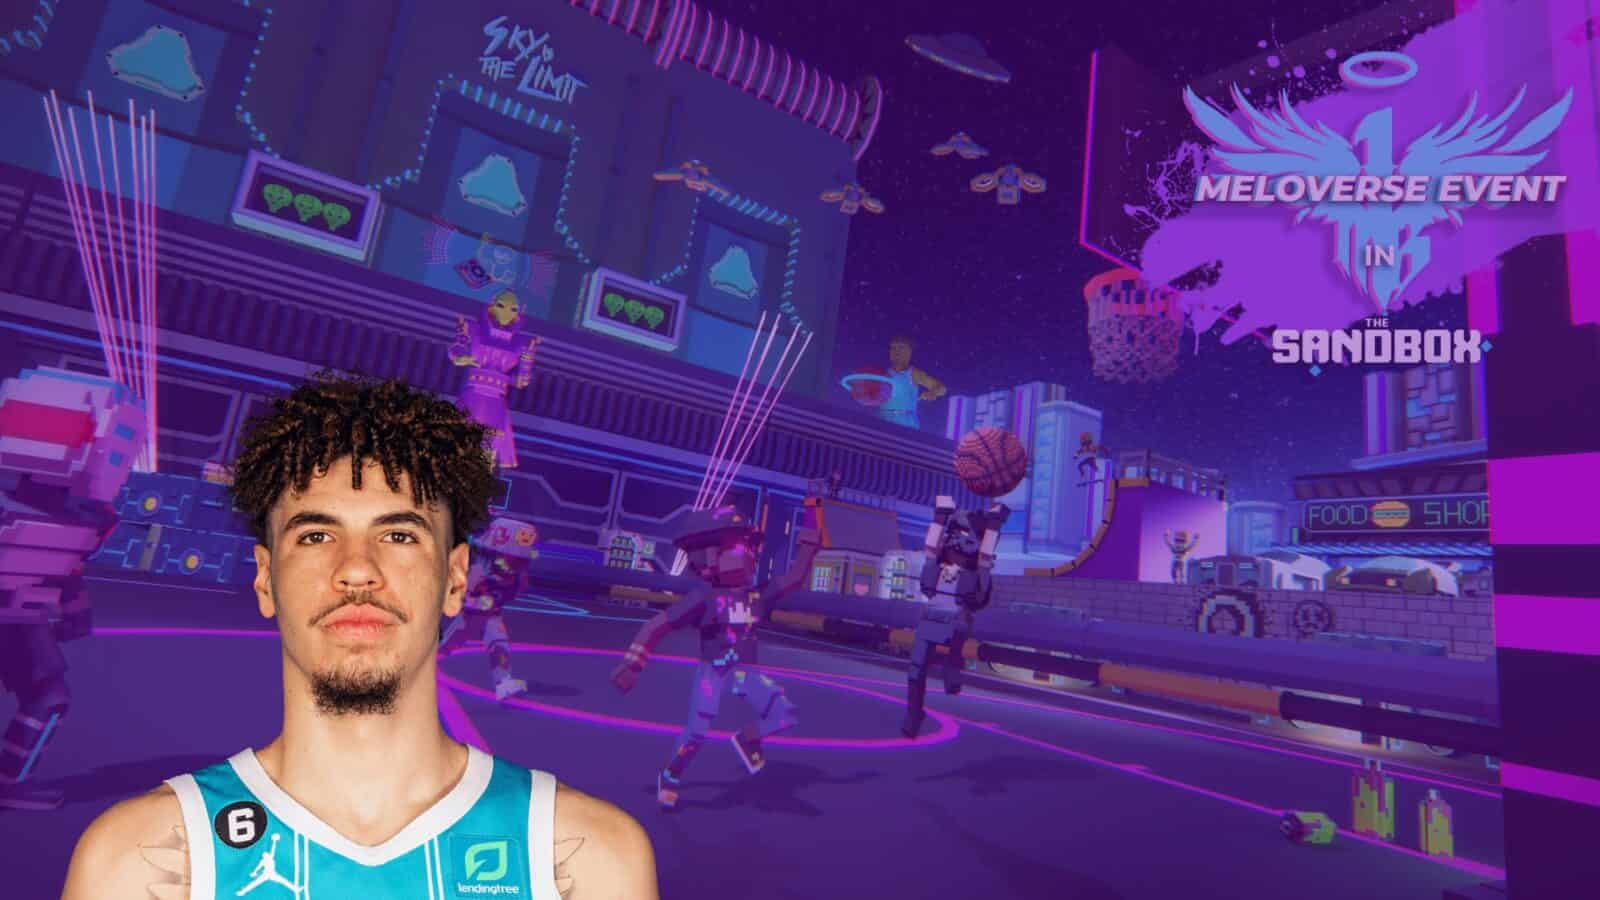 The Sandbox Teams Up with Playground Studios for LaMelo Ball's Metaverse Magic